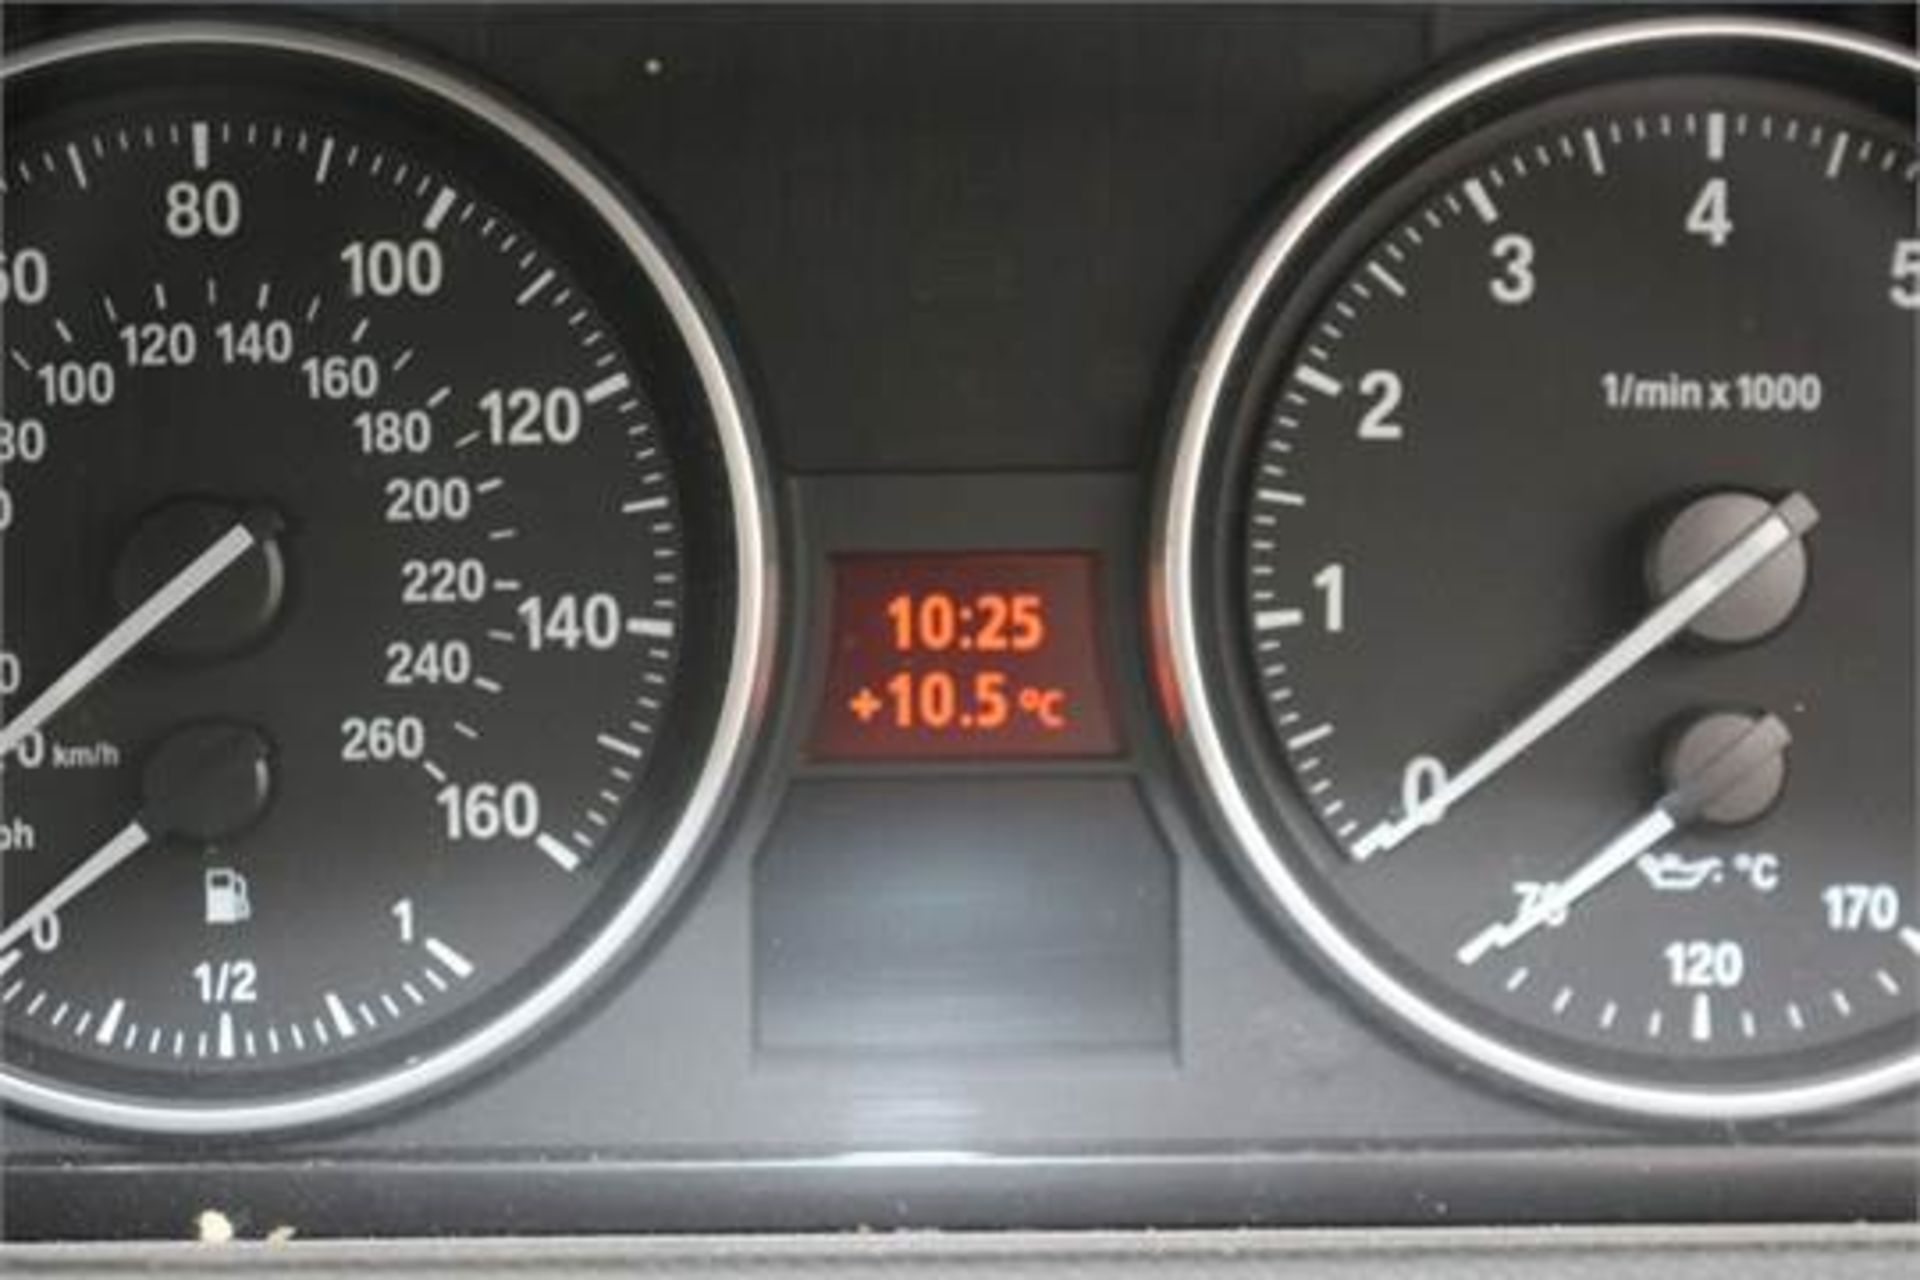 BMW, 330 SE COUPE, TN07 HTB, 3-0 LTR, PETROL, AUTOMATIC, 2 DOOR COUPE, 25.05.2007, CURRENT - Image 9 of 13